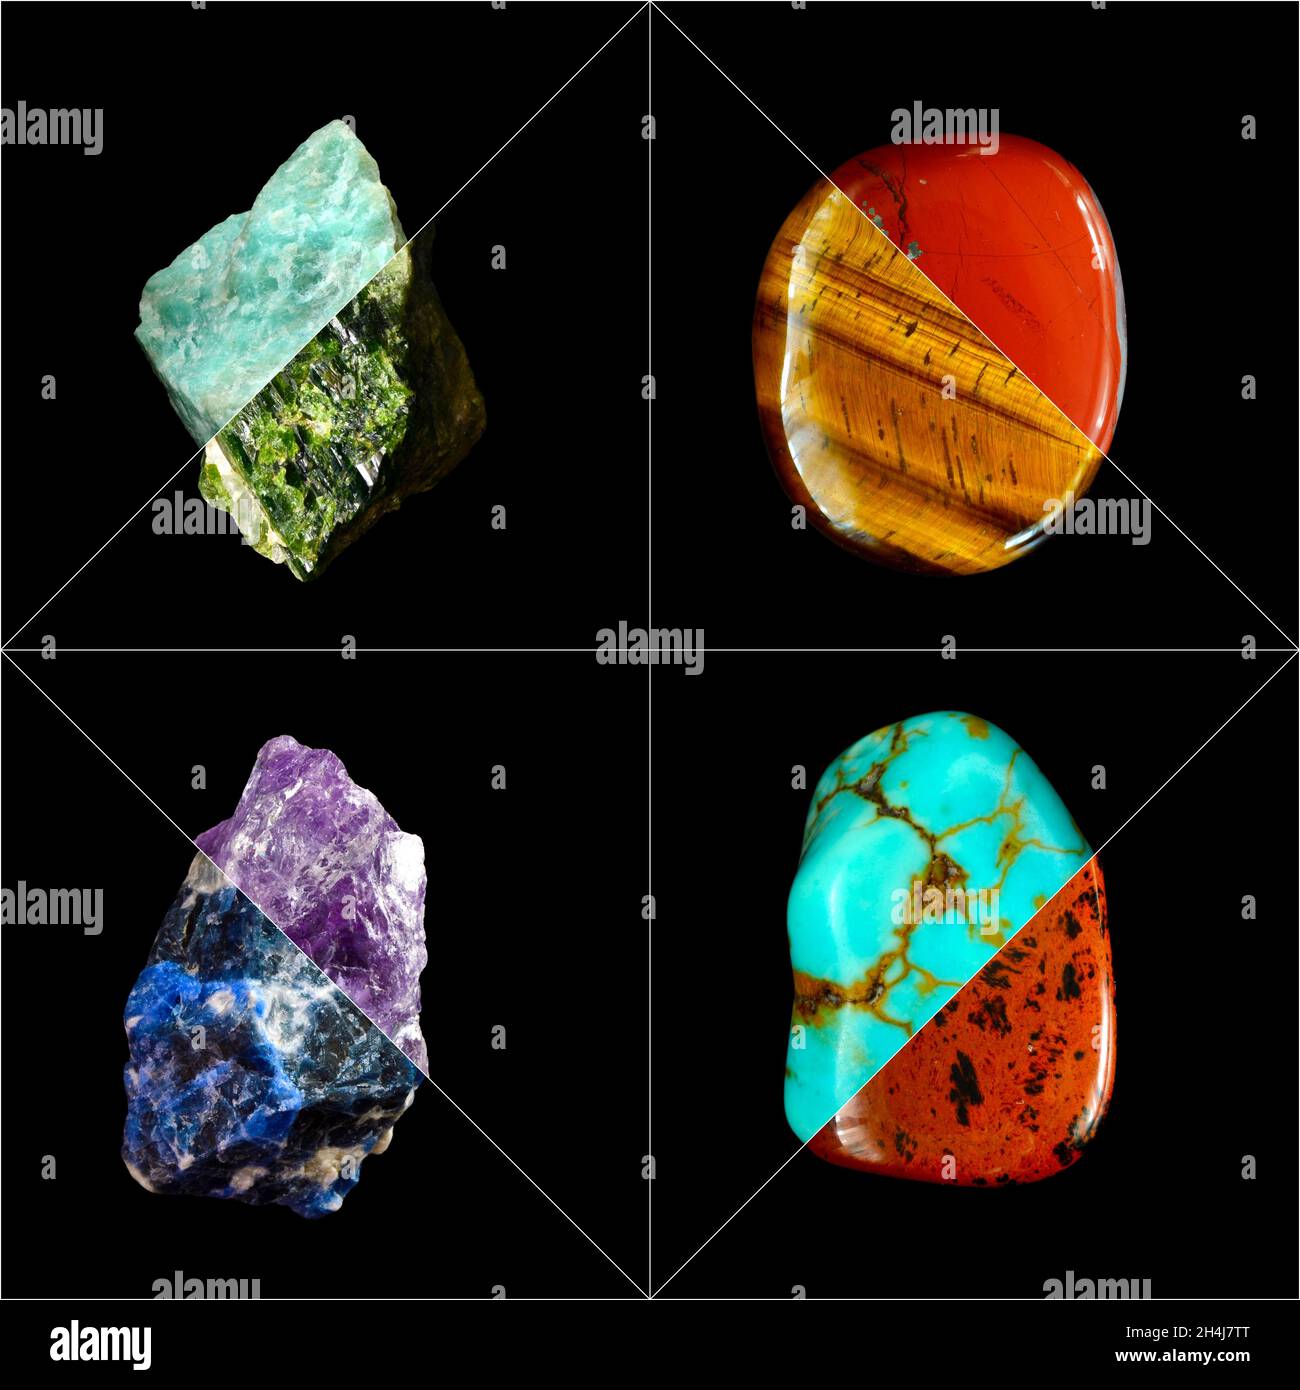 Collage of various mineral rocks and stones Stock Photo